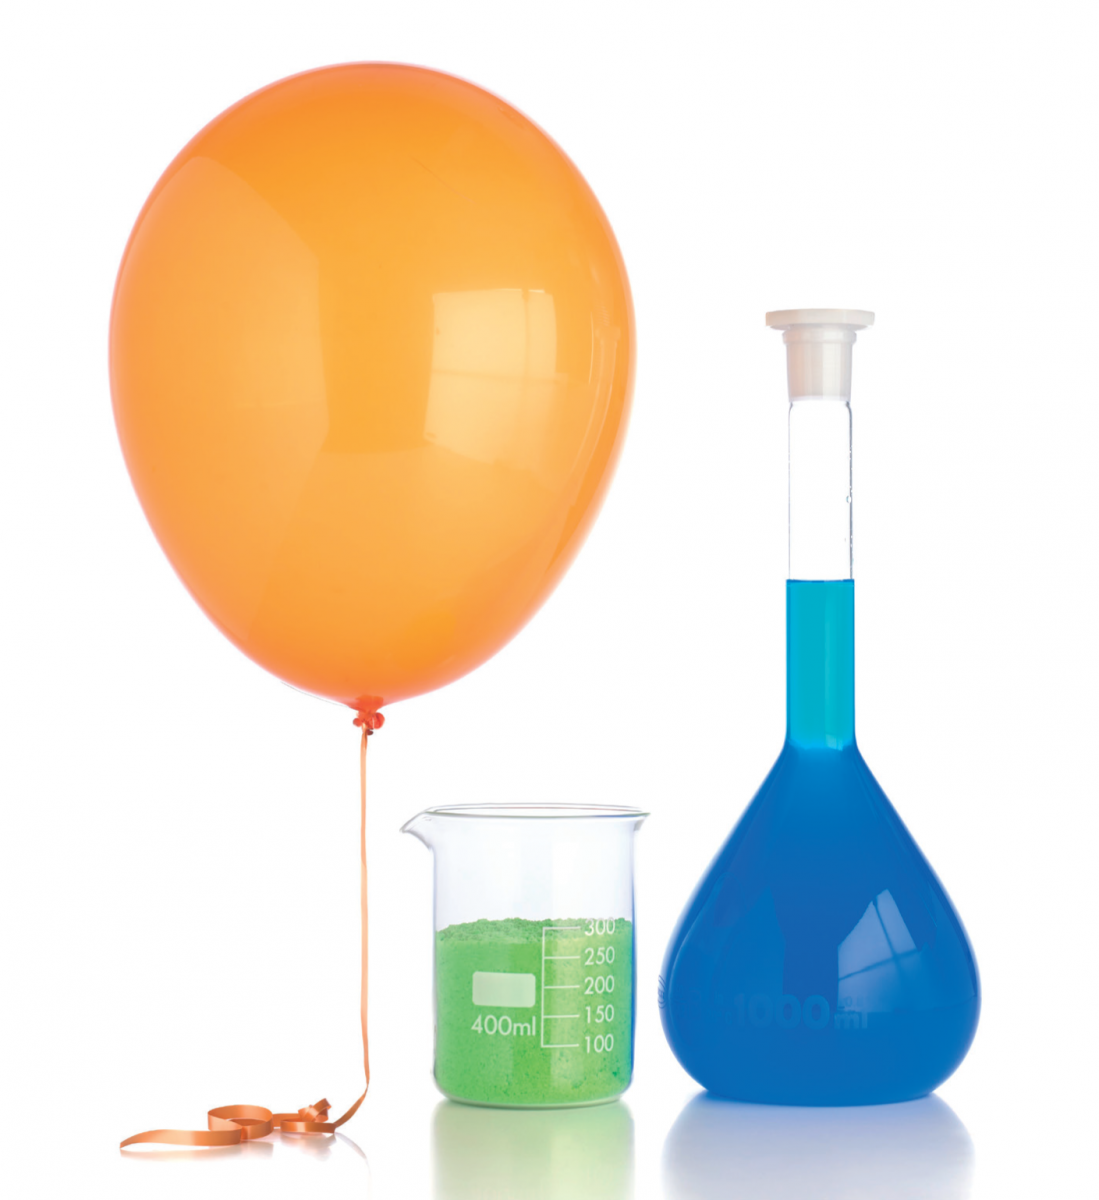 A balloon, a flask and a beaker, each containing one mole of a substance. The balloon contains one mole of a gas, the beaker one mole of solid nickel (II) chloride, and the flask one mole of copper (II) sulfate in one litre of water (a one-molar solution).